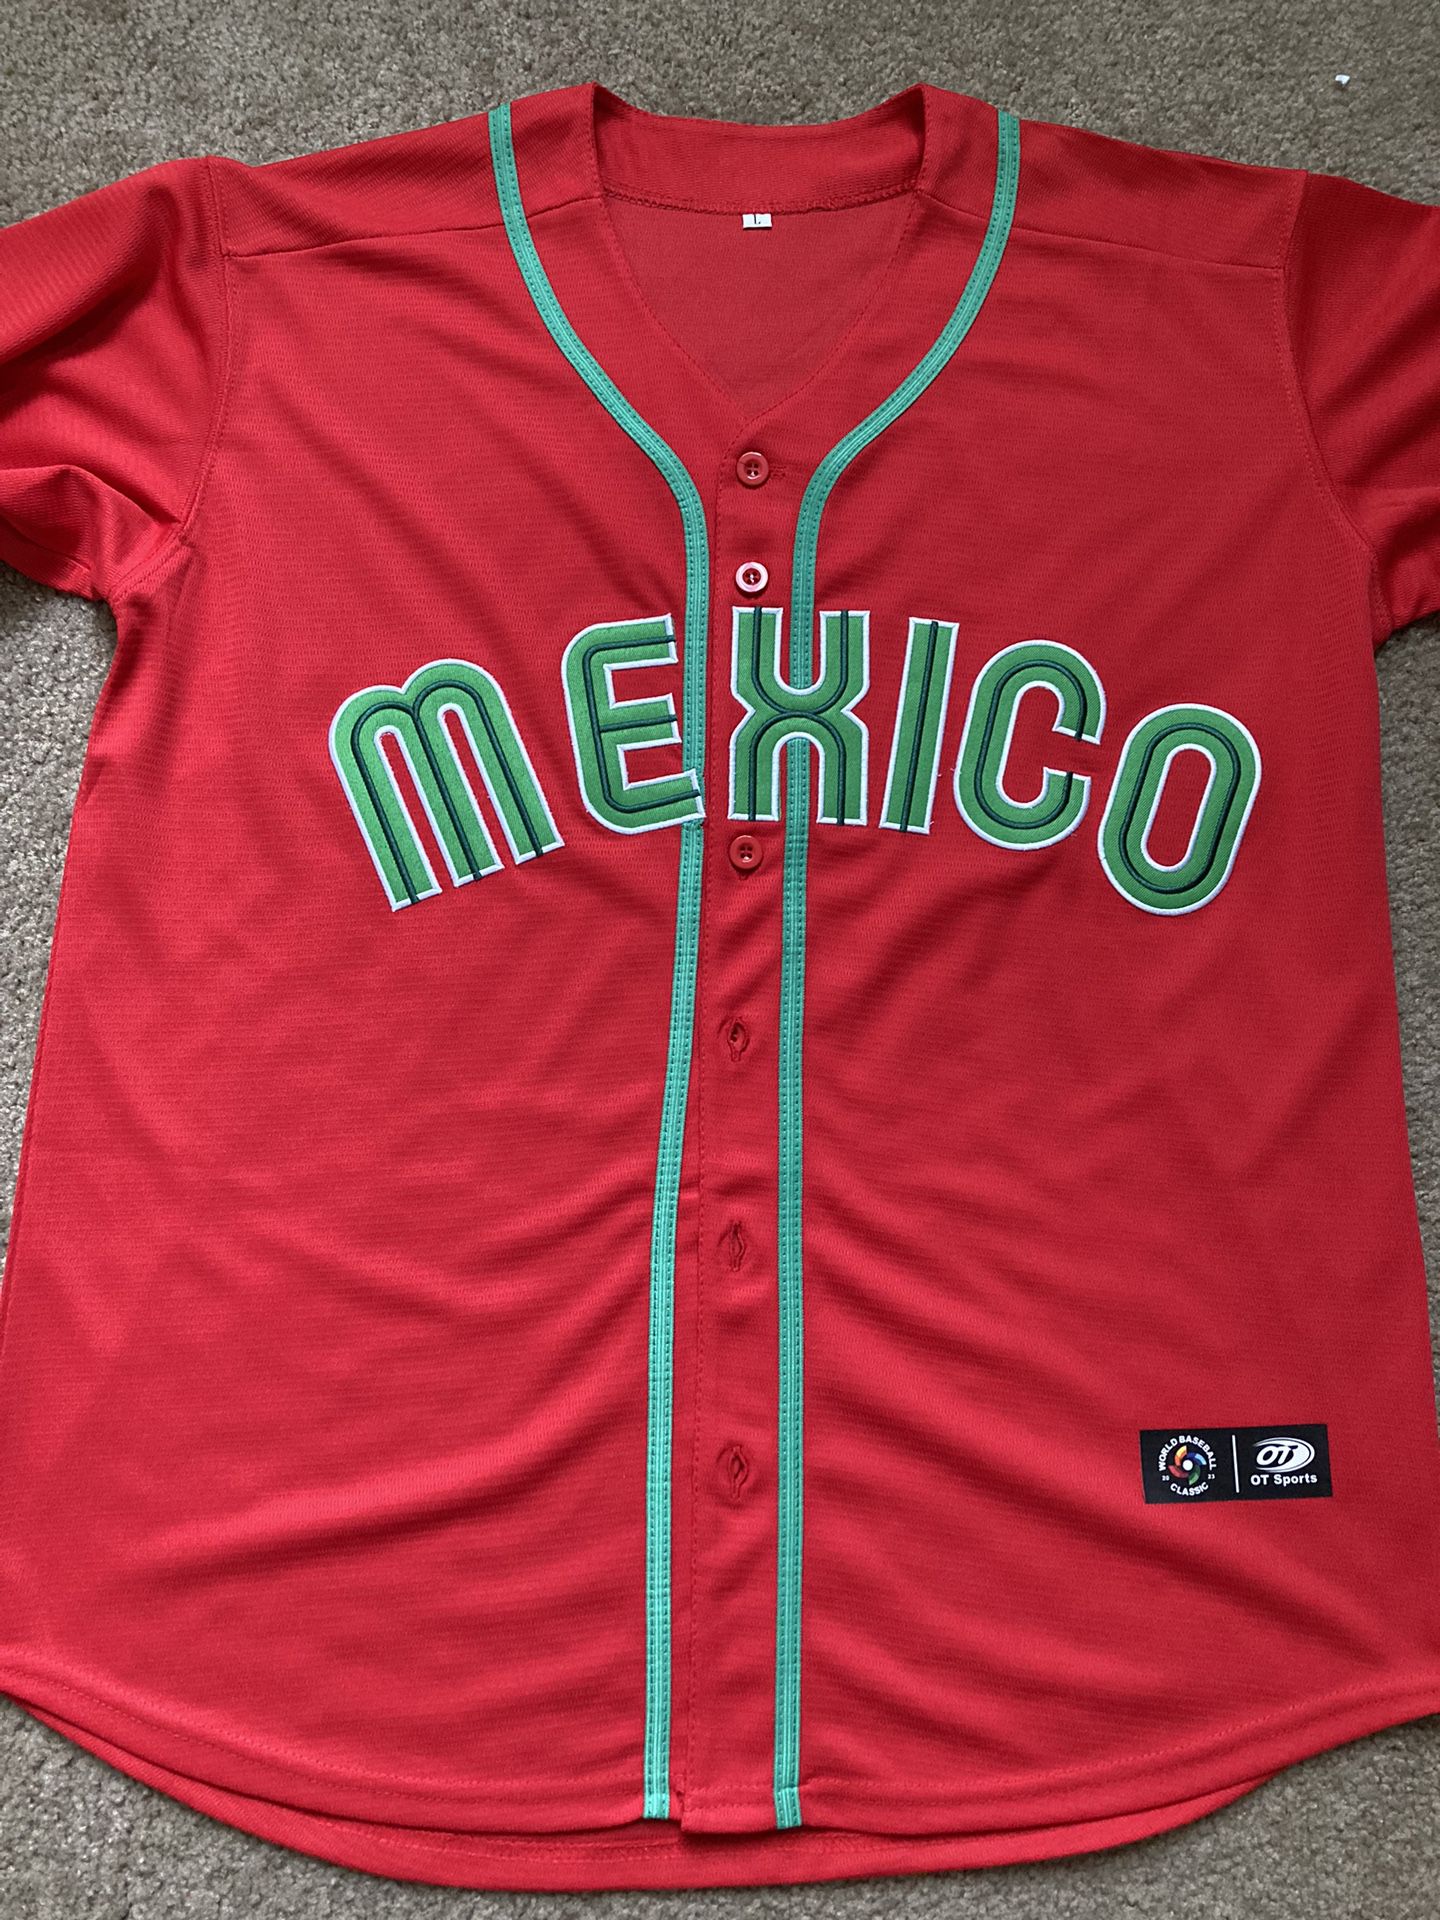 Vintage Majestic Pinstripe Chicago White SOX MLB Baseball Authentic Jersey  for Sale in Tempe, AZ - OfferUp